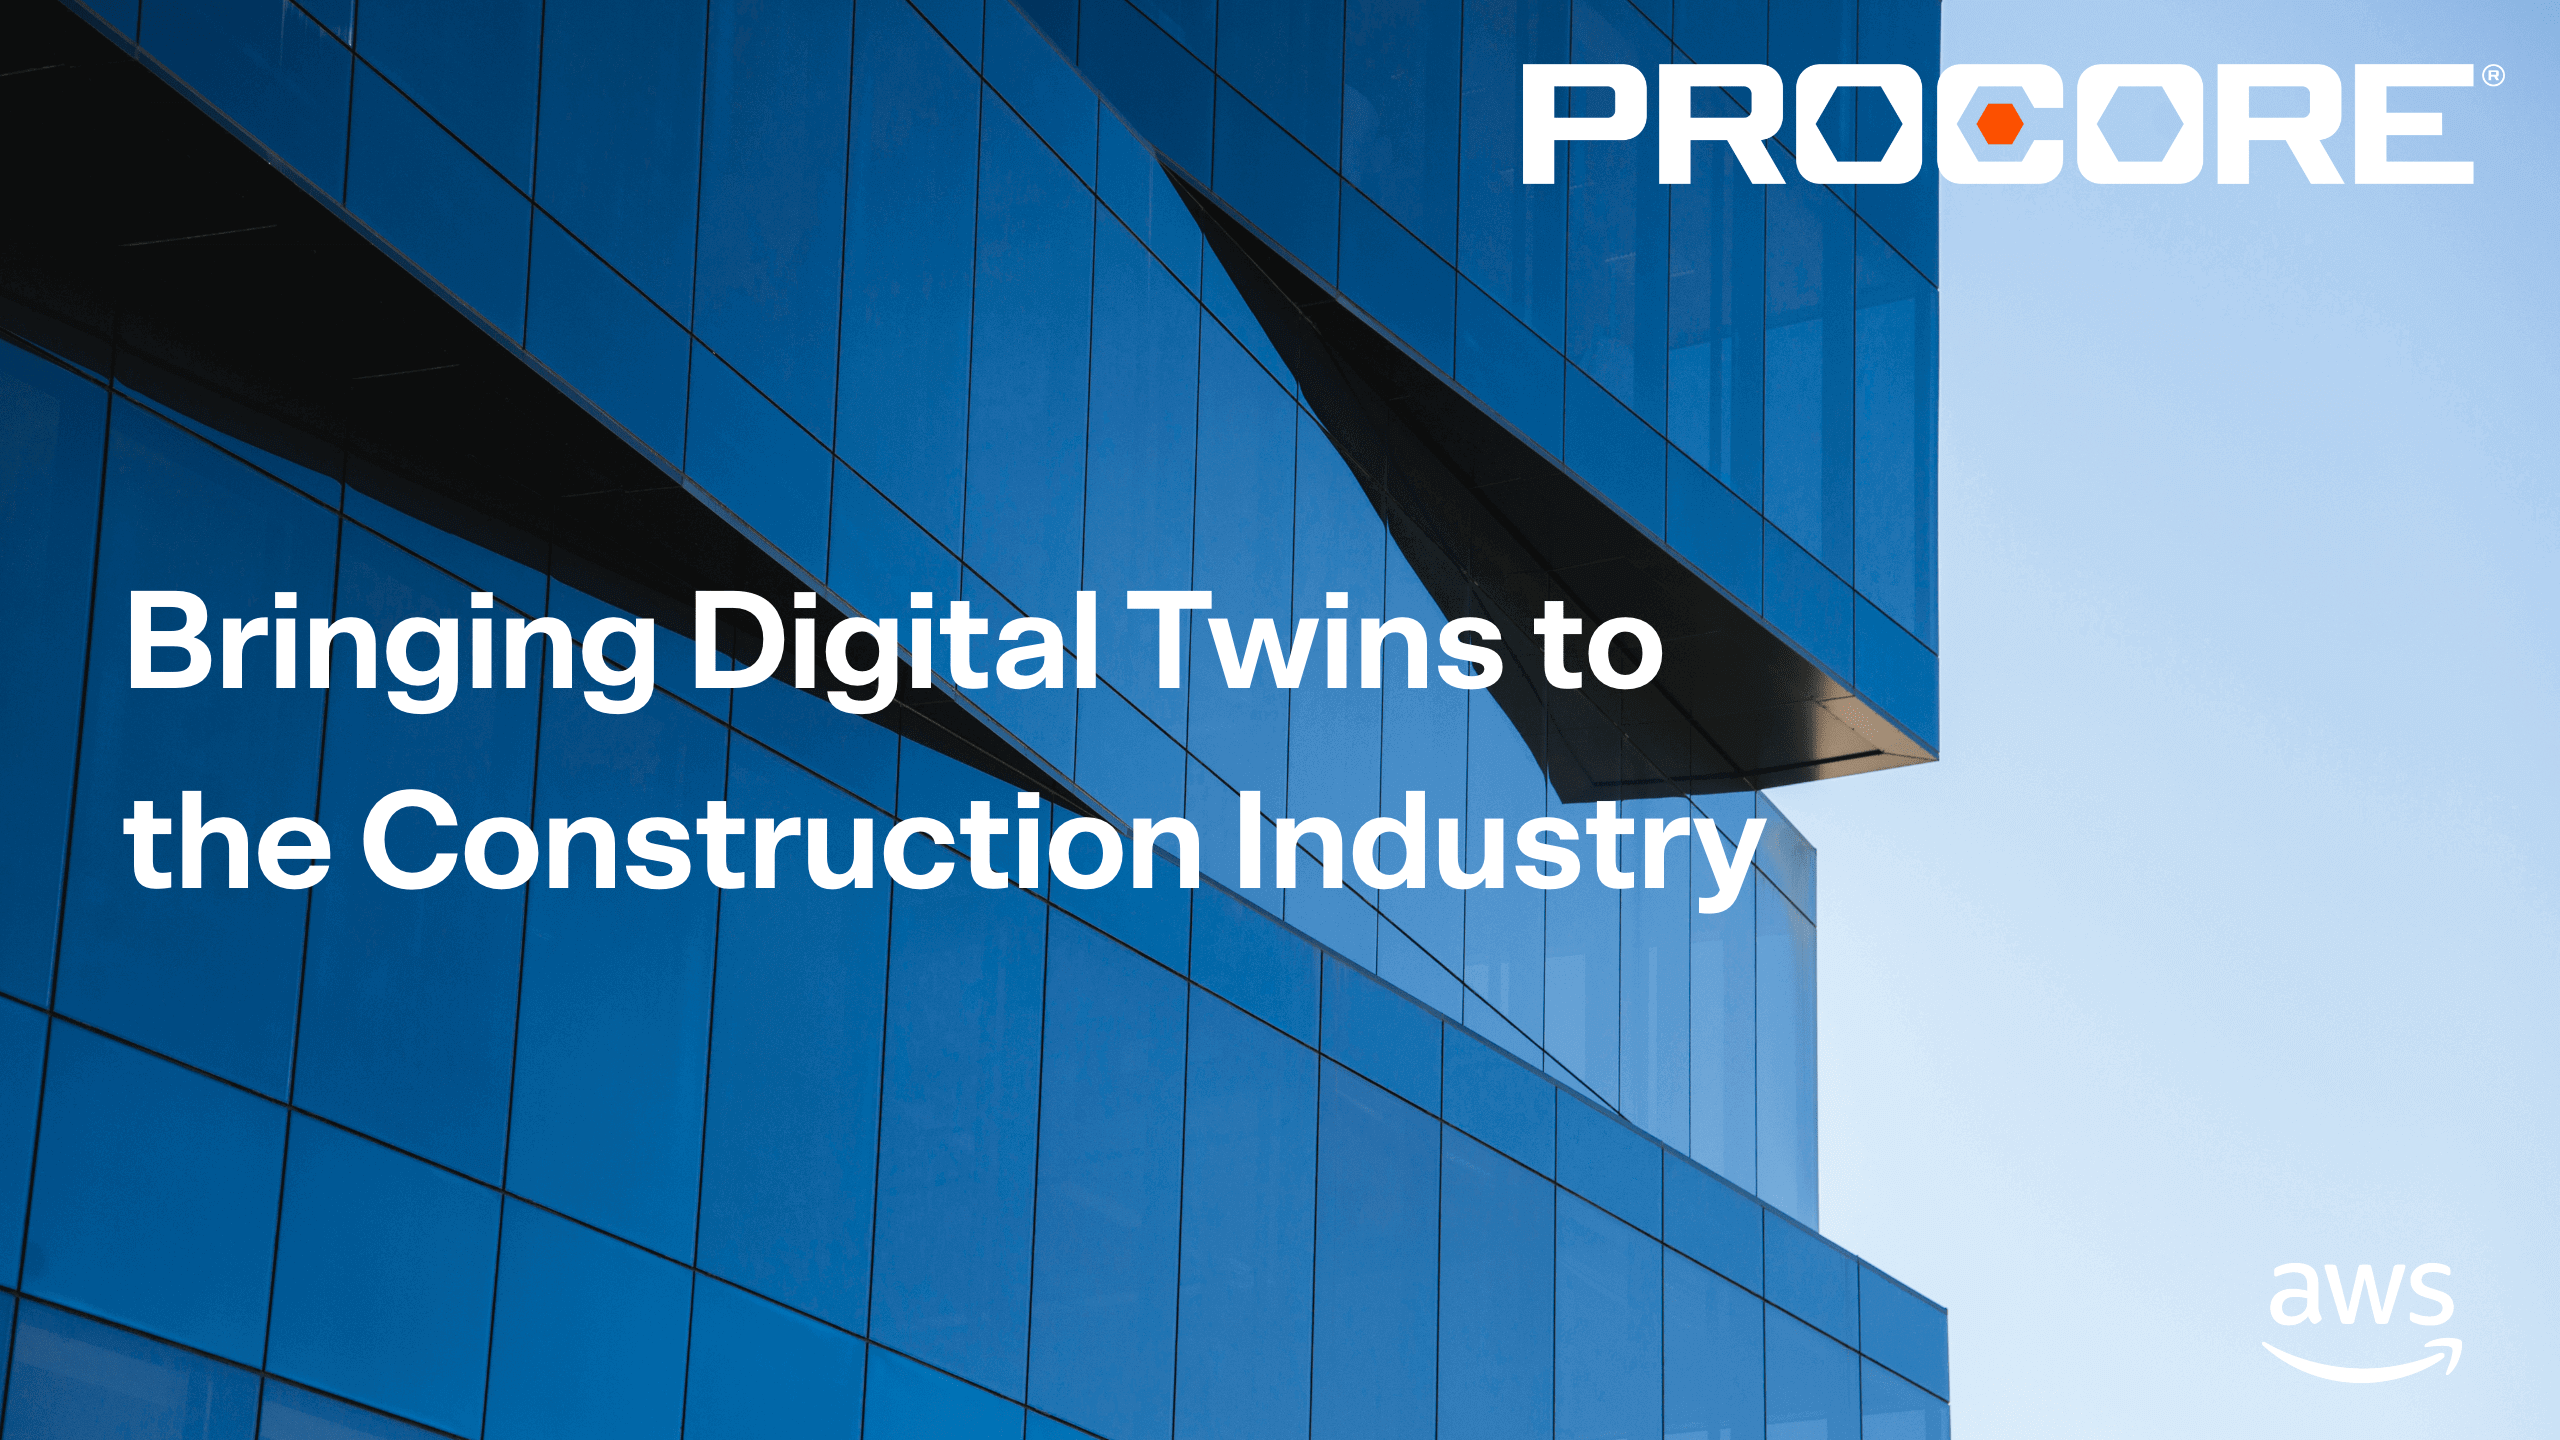 "Bringing digital twins to the construction industry" text with a skyscraper image in the back